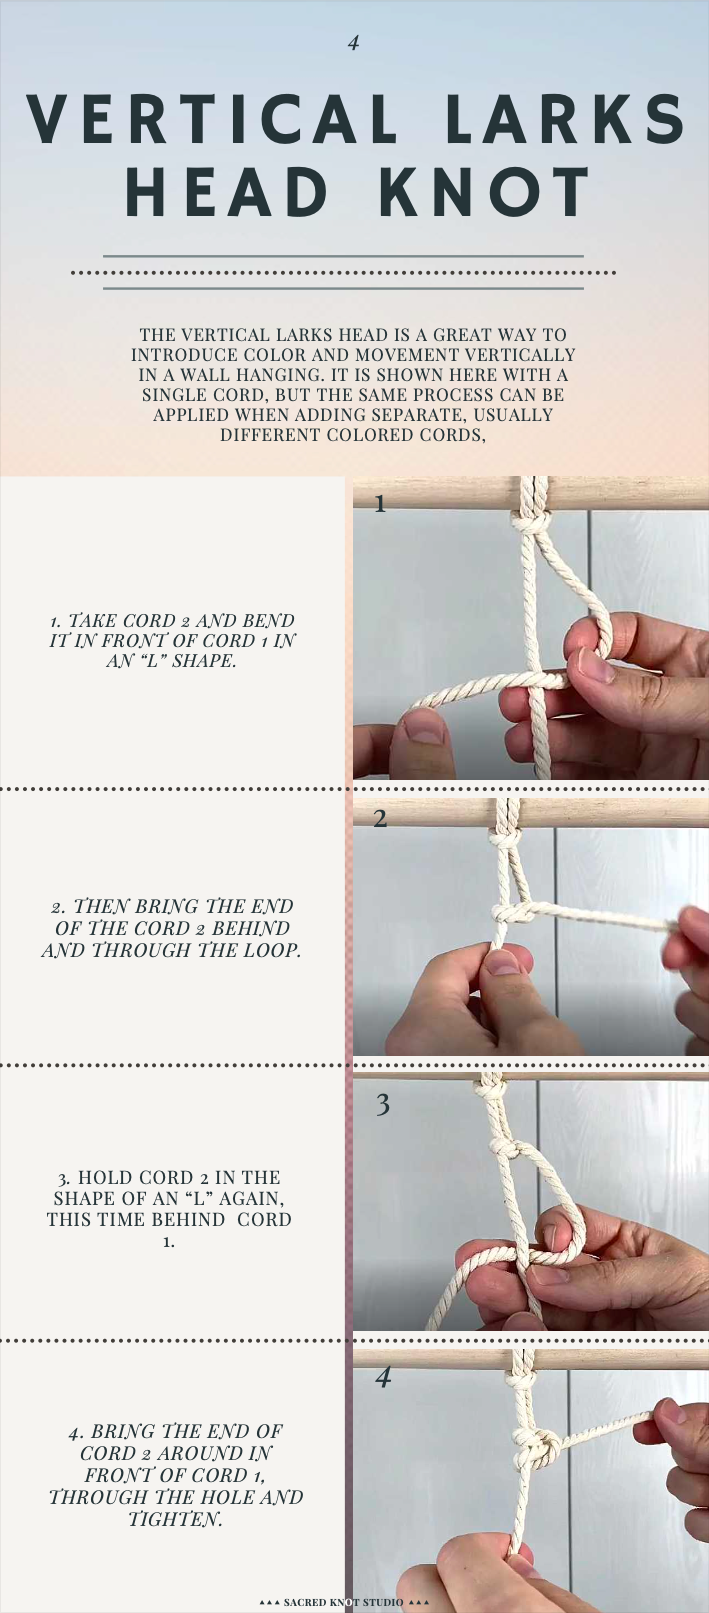 Macrame Kits for Adults Beginners: DIY Macrame Kit with 220 Yards Macrame  Cord and 58pcs Macrame Supplies. E-Book Tutorial for 5 Macrame Projects and